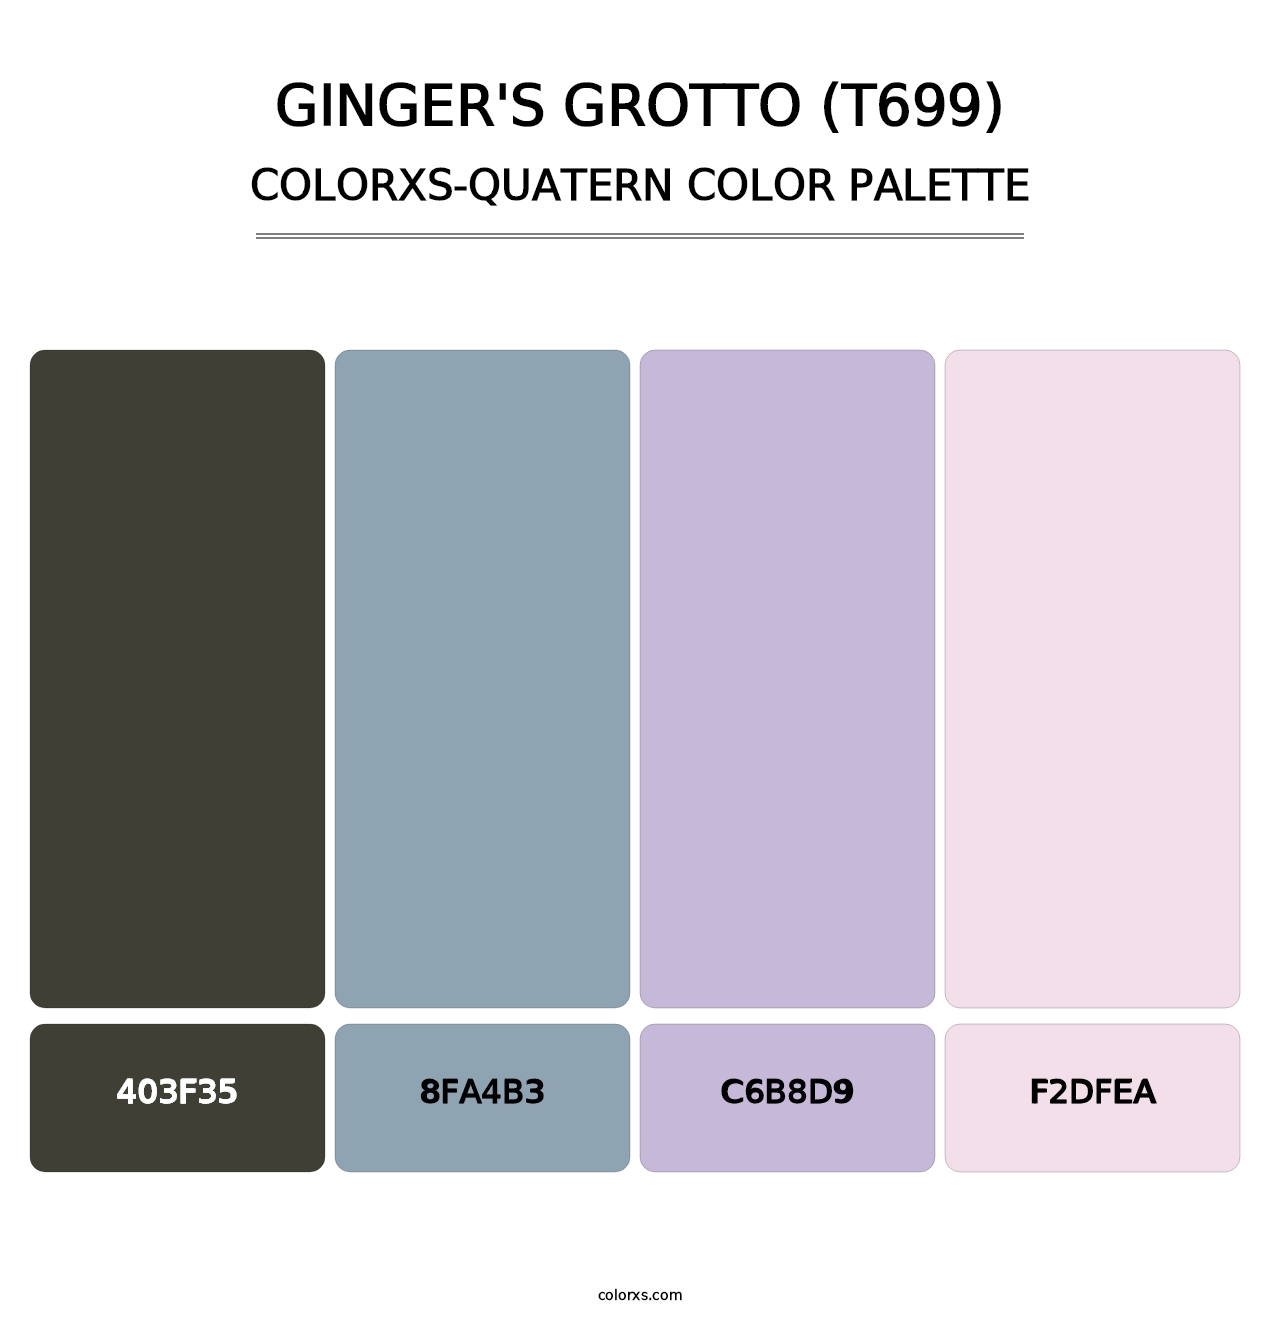 Ginger's Grotto (T699) - Colorxs Quatern Palette